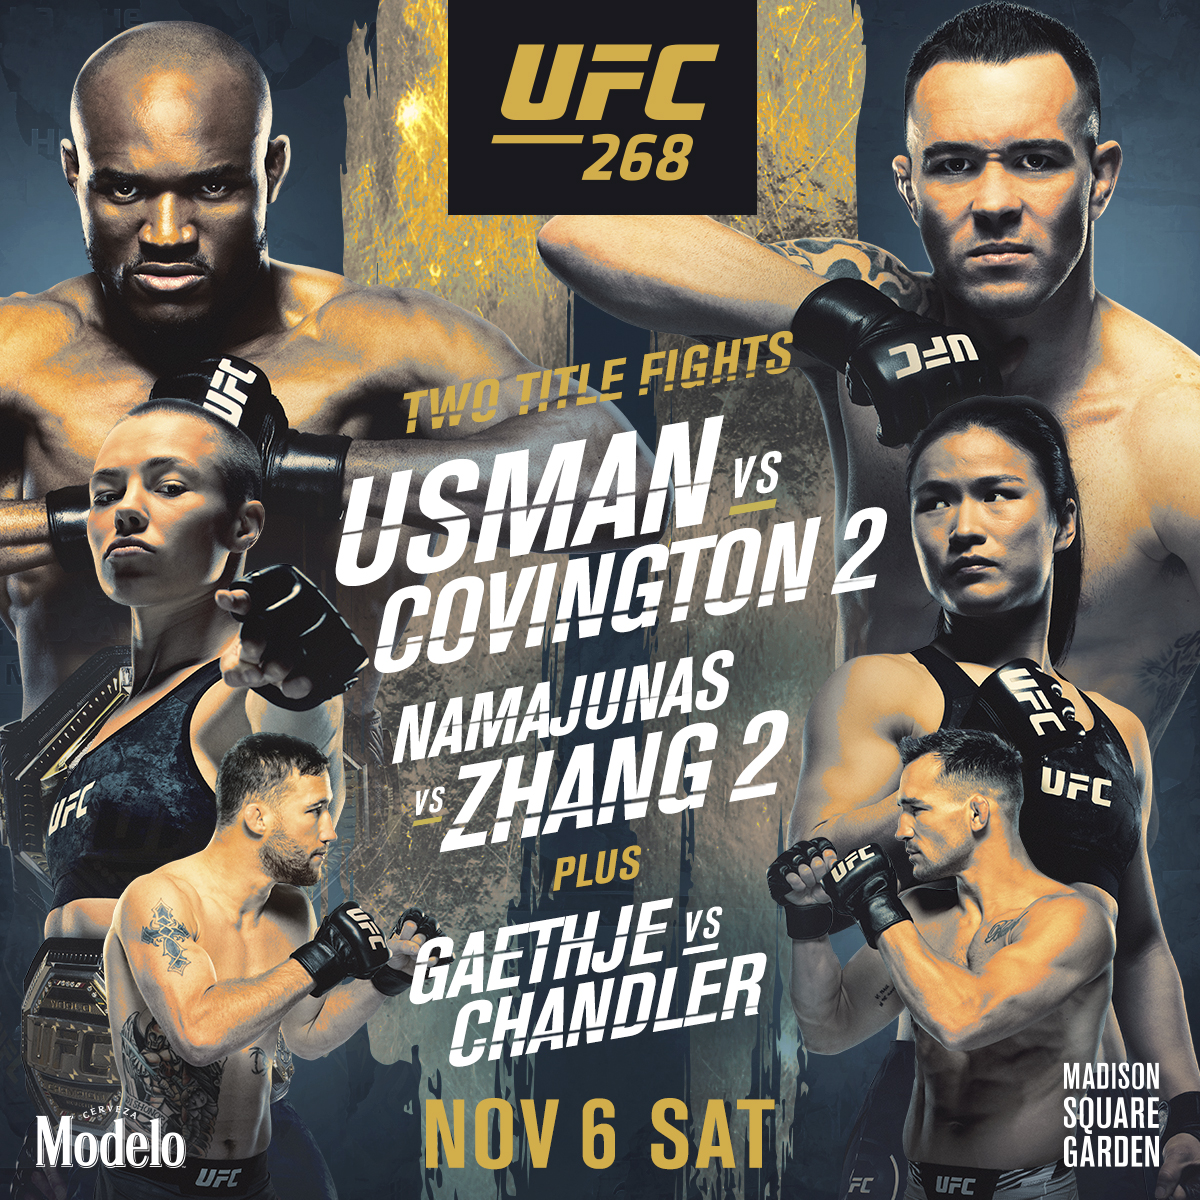 UFC 268 Watch Party